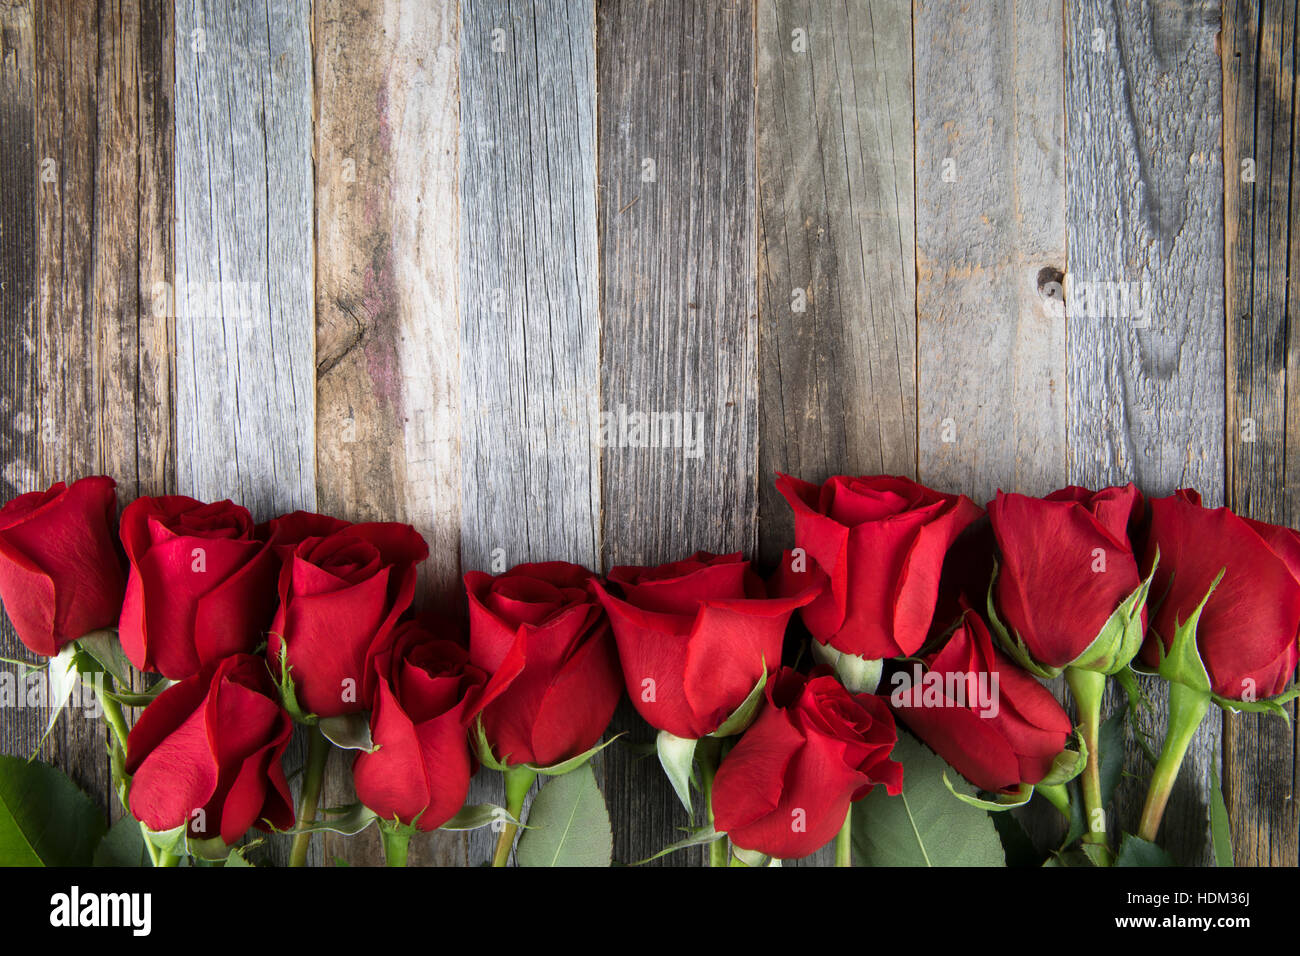 Romantic red roses for a special occasions on a wooden background with copy space. Stock Photo